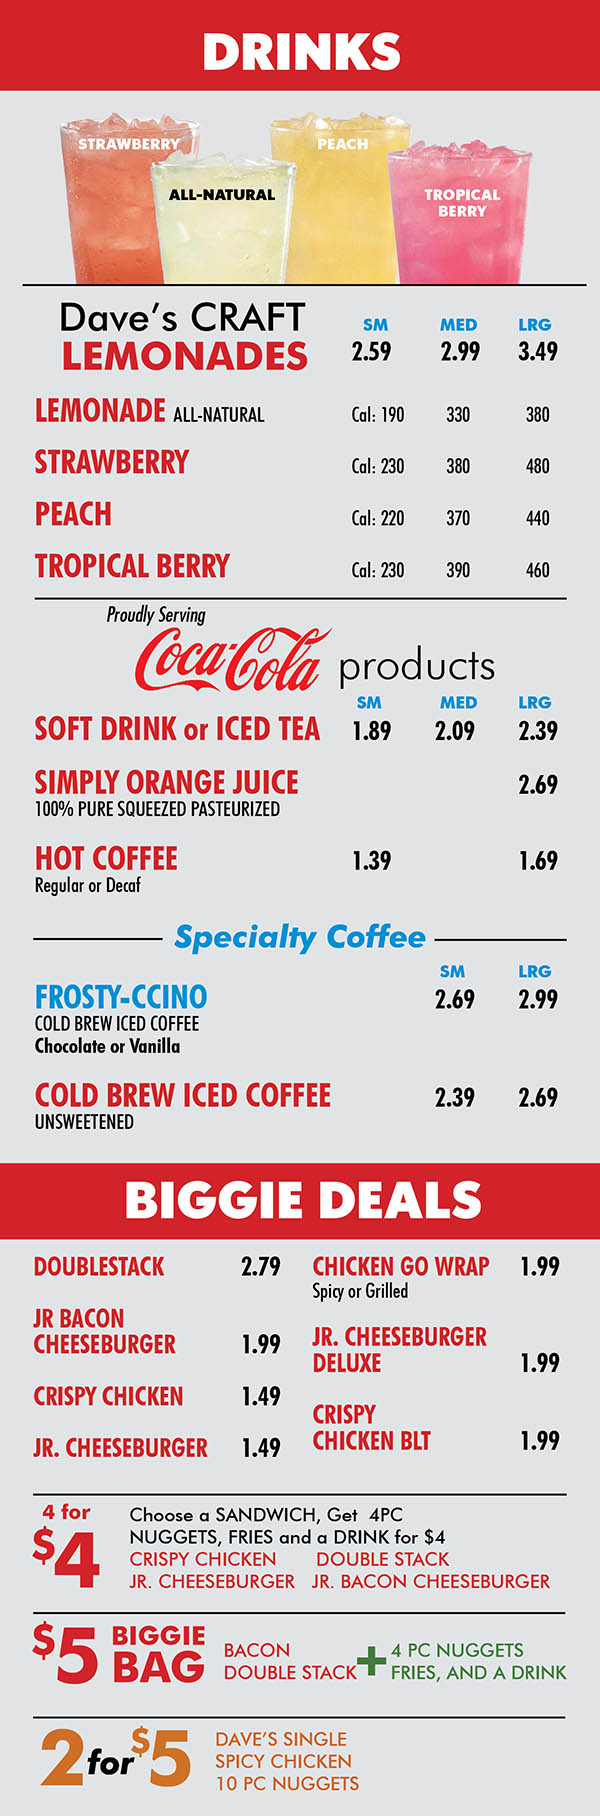 Wendy's N 84th St Lincoln NE Menu Page 5
DRINKS
STRAWBERRY
PEACH
ALL-NATURAL
TROPICAL
BERRY
Dave’s CRAFT SM MED LRG
LEMONADES 2.59 2.99 3.49 LEMONADE ALL-NATURAL Cal: 190 330 380
STRAWBERRY Cal: 230 380 480
PEACH Cal: 220 370 440
TROPICAL BERRY Cal: 230 390 460
Proudly Serving
products
SM MED LRG
SOFT DRINK or ICED TEA 1.89 2.09 2.39
SIMPLY ORANGE JUICE 2.69
100% PURE SQUEEZED PASTEURIZED
HOT COFFEE 1.39 1.69
Regular or Decaf
Specialty Coffee
SM LRG
FROSTY-CCINO 2.69 2.99
COLD BREW ICED COFFEE
Chocolate or Vanilla
COLD BREW ICED COFFEE 2.39 2.69
UNSWEETENED
BIGGIE DEALS
DOUBLESTACK 2.79 JR BACON CHEESEBURGER 1.99 CRISPY CHICKEN 1.49 JR. CHEESEBURGER 1.49
CHICKEN GO WRAP 1.99
Spicy or Grilled
JR. CHEESEBURGER
DELUXE 1.99
CRISPY
CHICKEN BLT 1.99
4 for
$4
Choose a SANDWICH, Get 4PC
NUGGETS, FRIES and a DRINK for $4
CRISPY CHICKEN DOUBLE STACK
JR. CHEESEBURGER JR. BACON CHEESEBURGER
$5
BIGGIE
BAG
BACON
DOUBLE STACK
+
4 PC NUGGETS
FRIES, AND A DRINK
2for$5
DAVE’S SINGLE
SPICY CHICKEN
10 PC NUGGETS